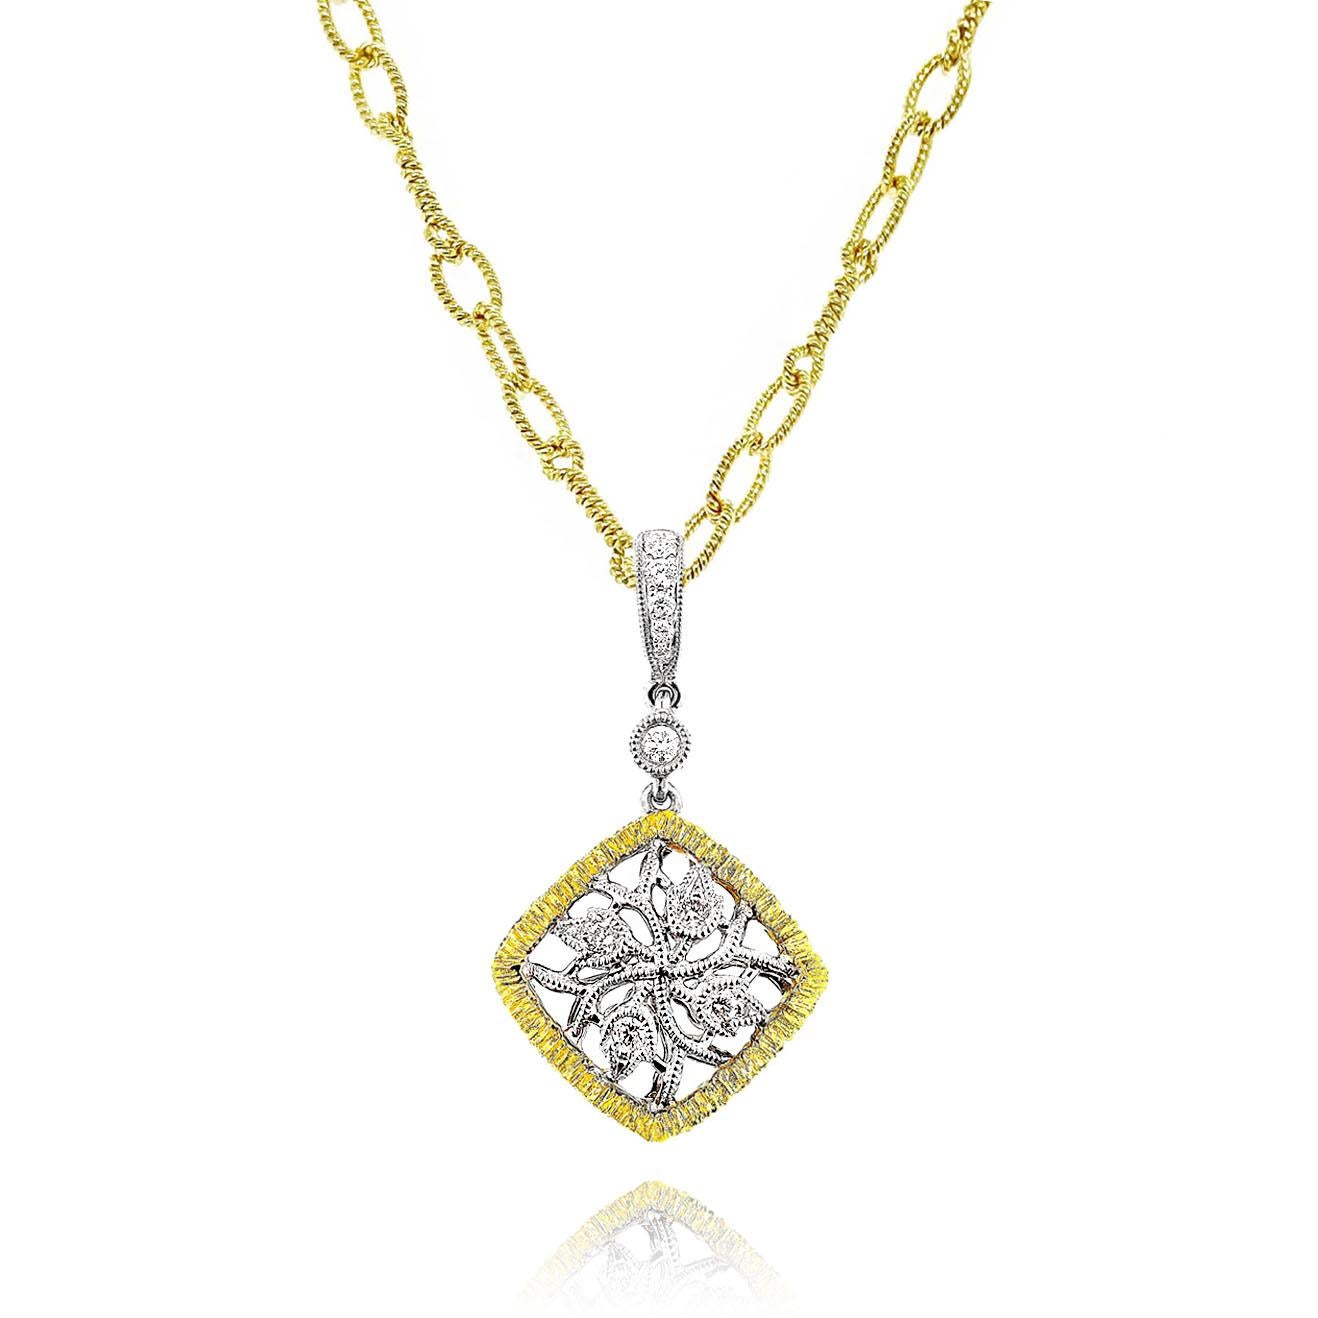 Produced by award winning Italian designer Stefano Vitolo. Stefano creates custom artisanal one of a kind jewelry with excellent gemstones in a truly old world Italian craftmanship.

This handcrafted pendant has 0.13 total carat weight of F/G color,